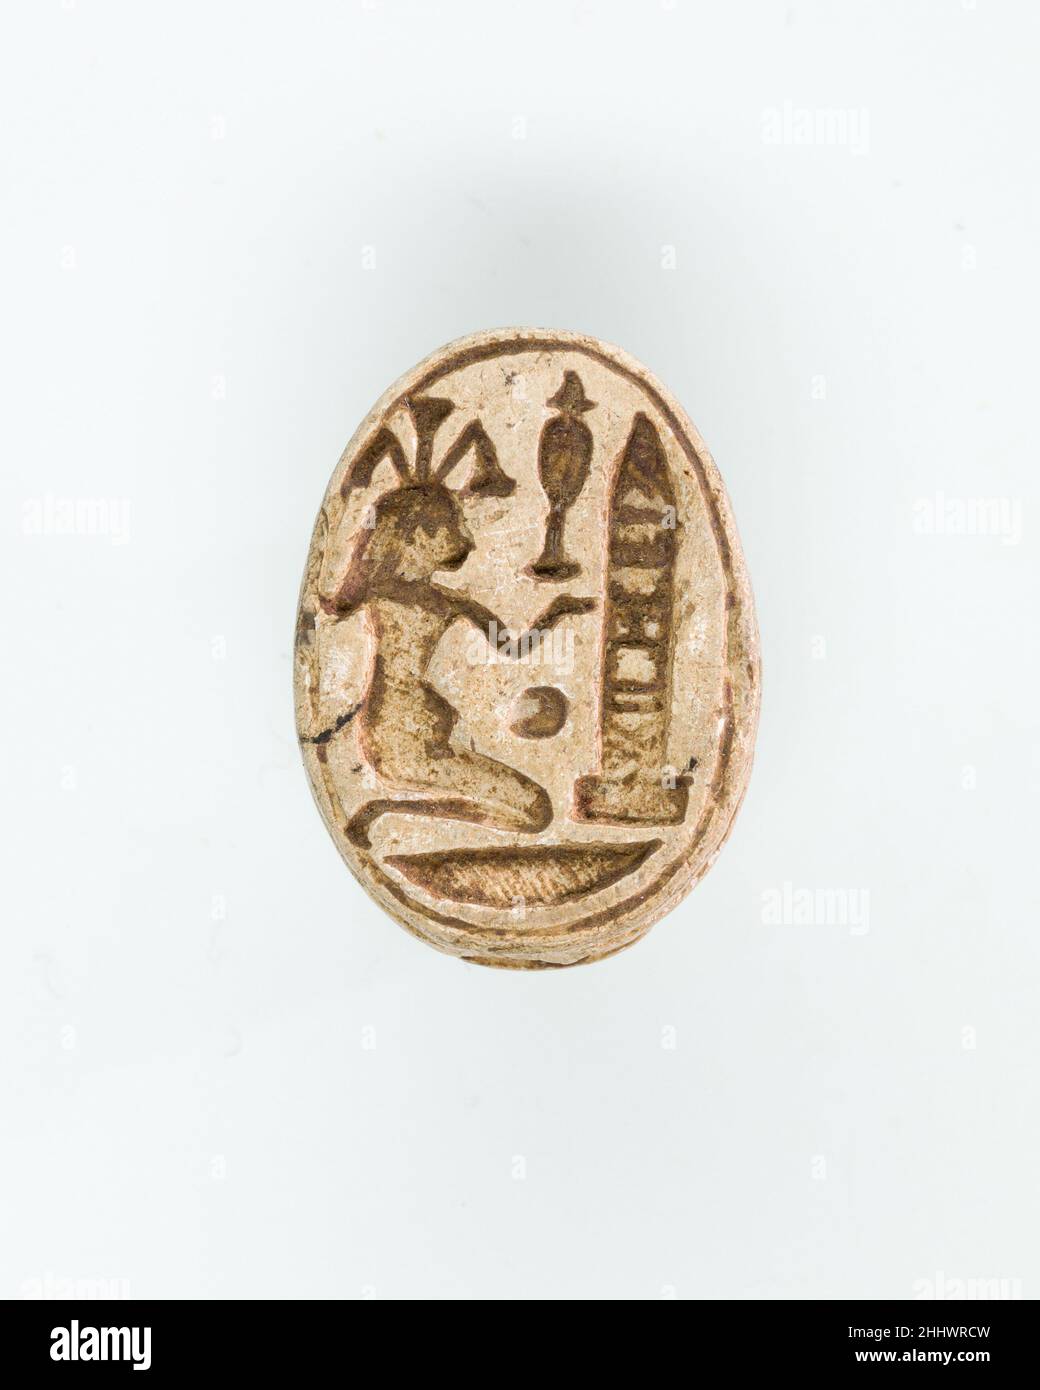 Scarab with kneeling Nile god before obelisk ca. 1295–1070 B.C. New Kingdom or early Third Intermediate Period The underside of the scarab shows the Nile god Hapy, identified by his headdress of papyrus stalks. He is the personification of the annual inundation and therefore also one of the ancient Egyptian fertility gods. He sits on his knees, offering a hes-vase, the hieroglyph of praise, while he faces an obelisk. The obelisk is one of the symbols of the sun god and can thus stand for Amun. Within the monument, however, one can also discern small hieroglyphs forming the throne name of phara Stock Photo